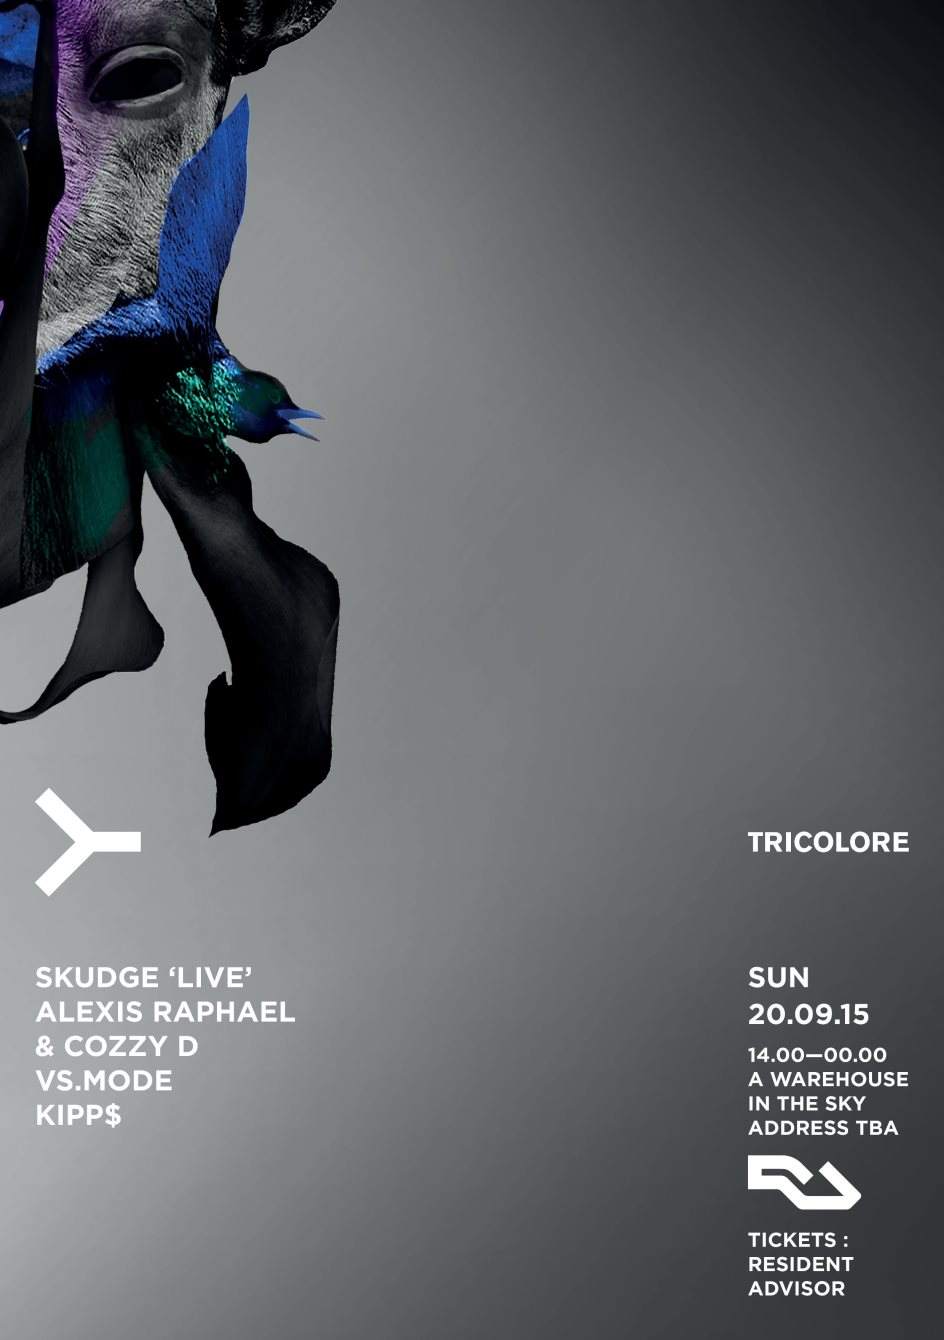 CANCELLED Tricolore 'A Warehouse In The Sky' with Skudge Live - Página frontal